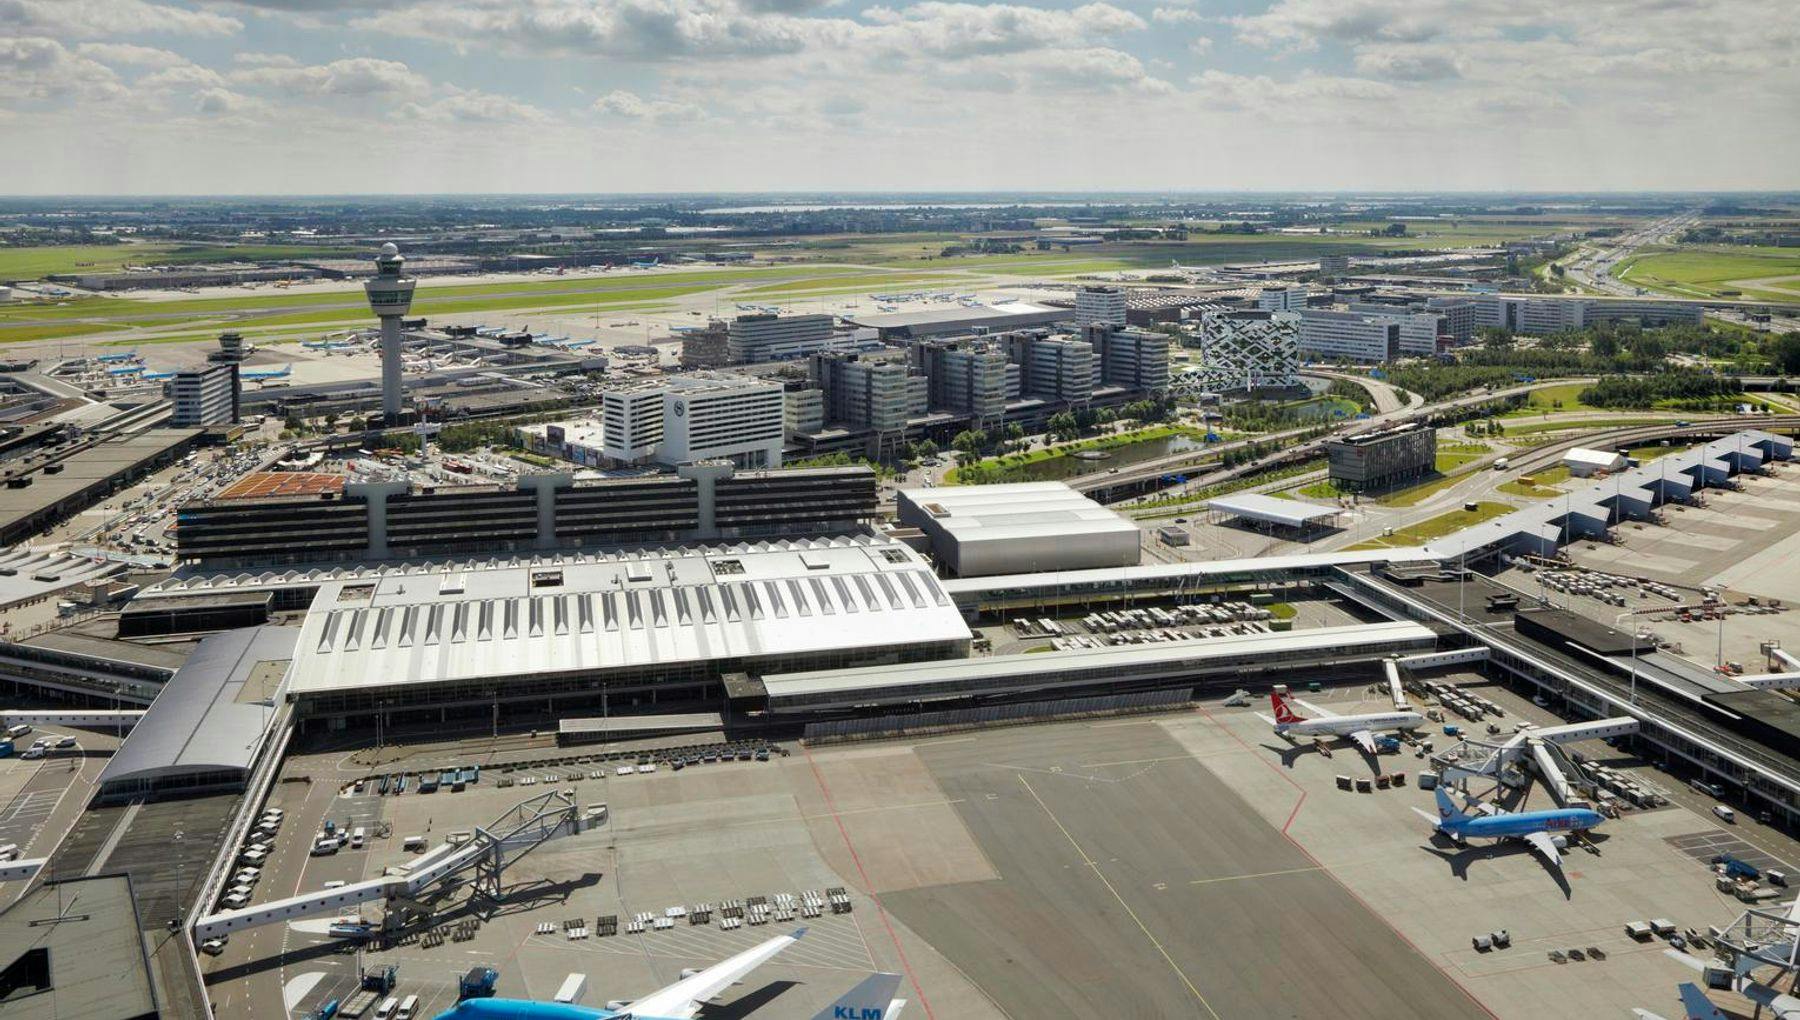 Aerial view of the Schiphol airport